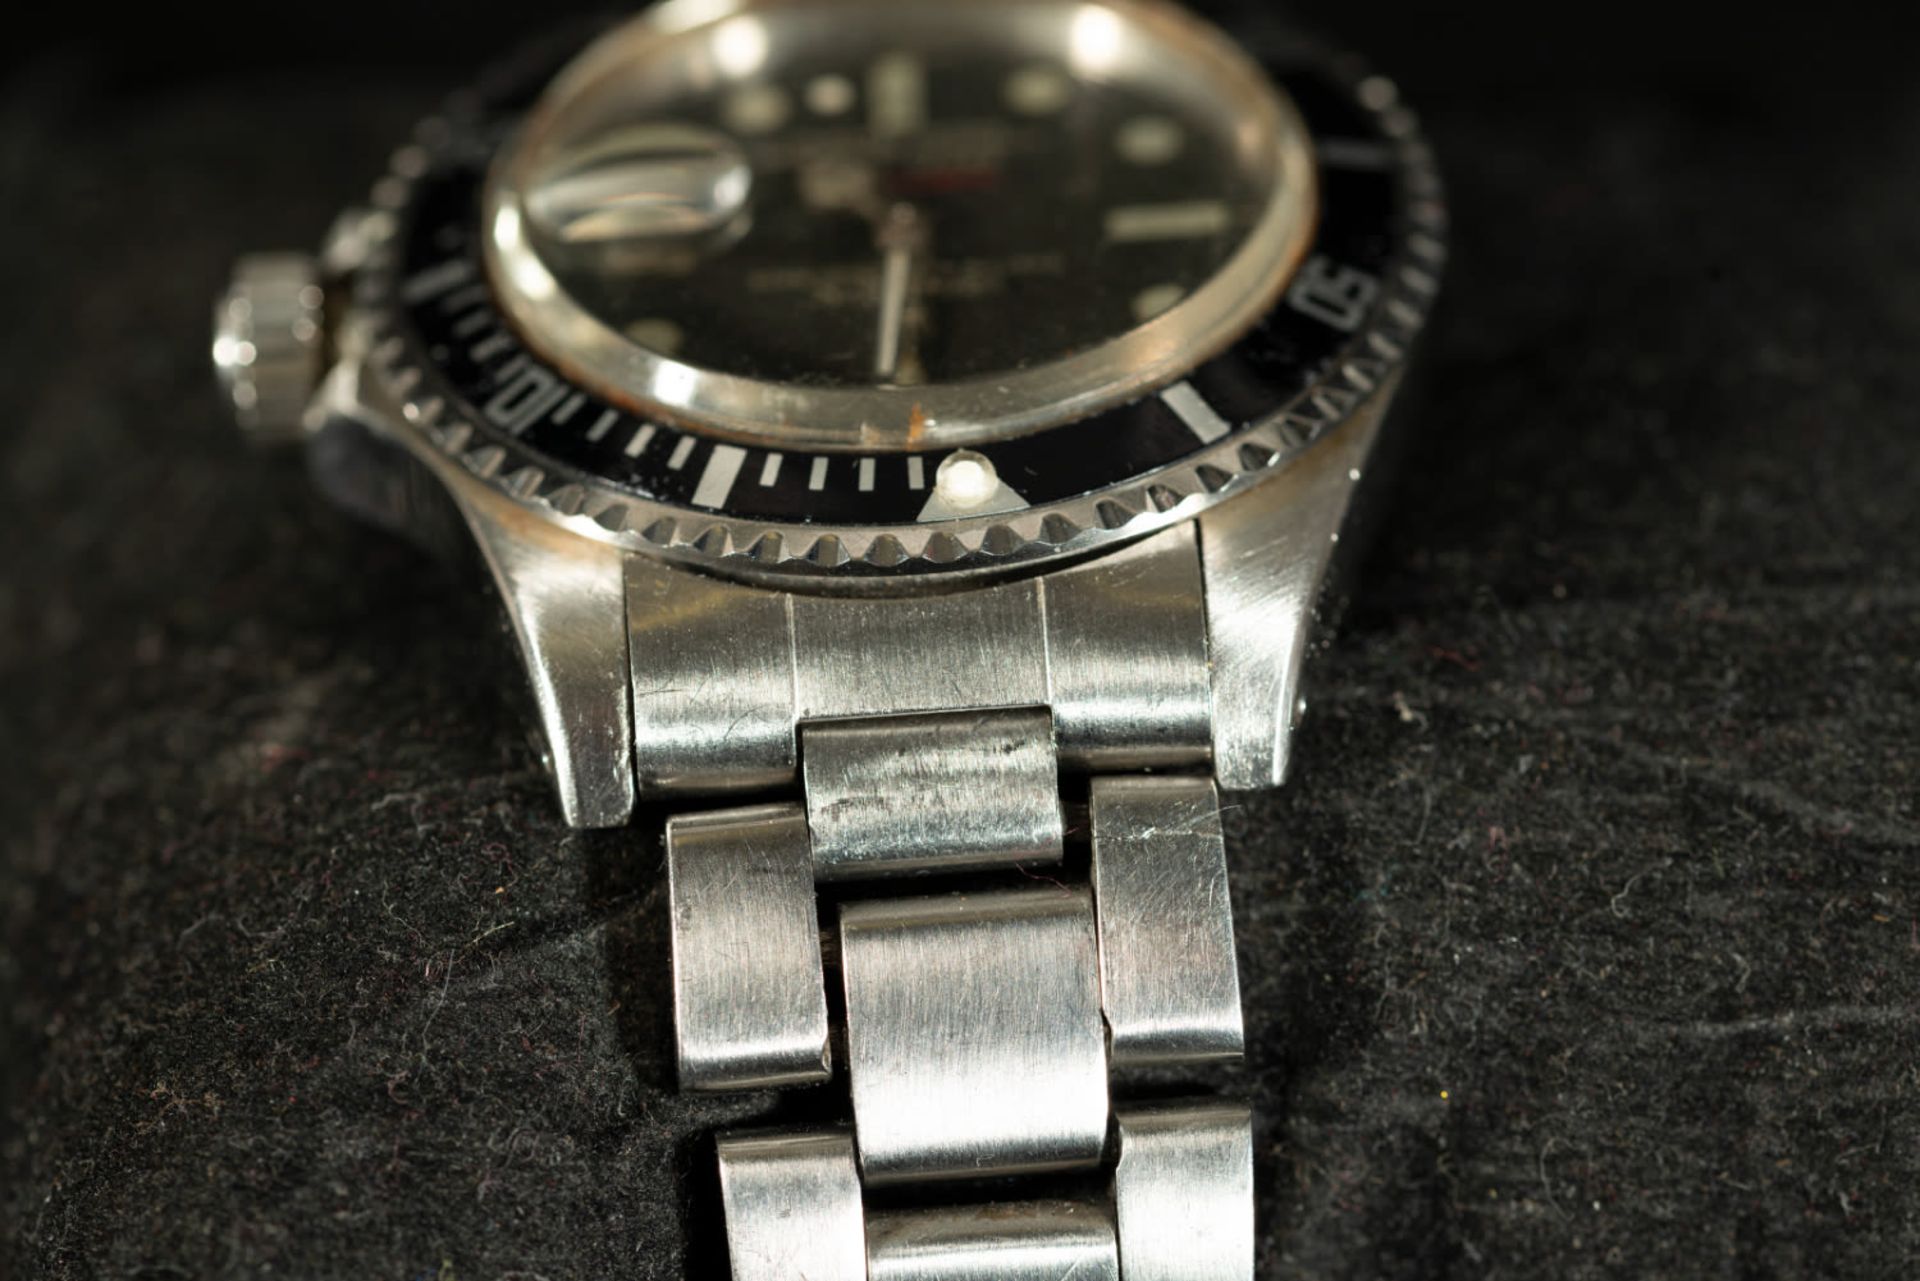 Very rare Rolex Submariner Big Red Vintage model 1680, year 1969, in steel - Image 7 of 10